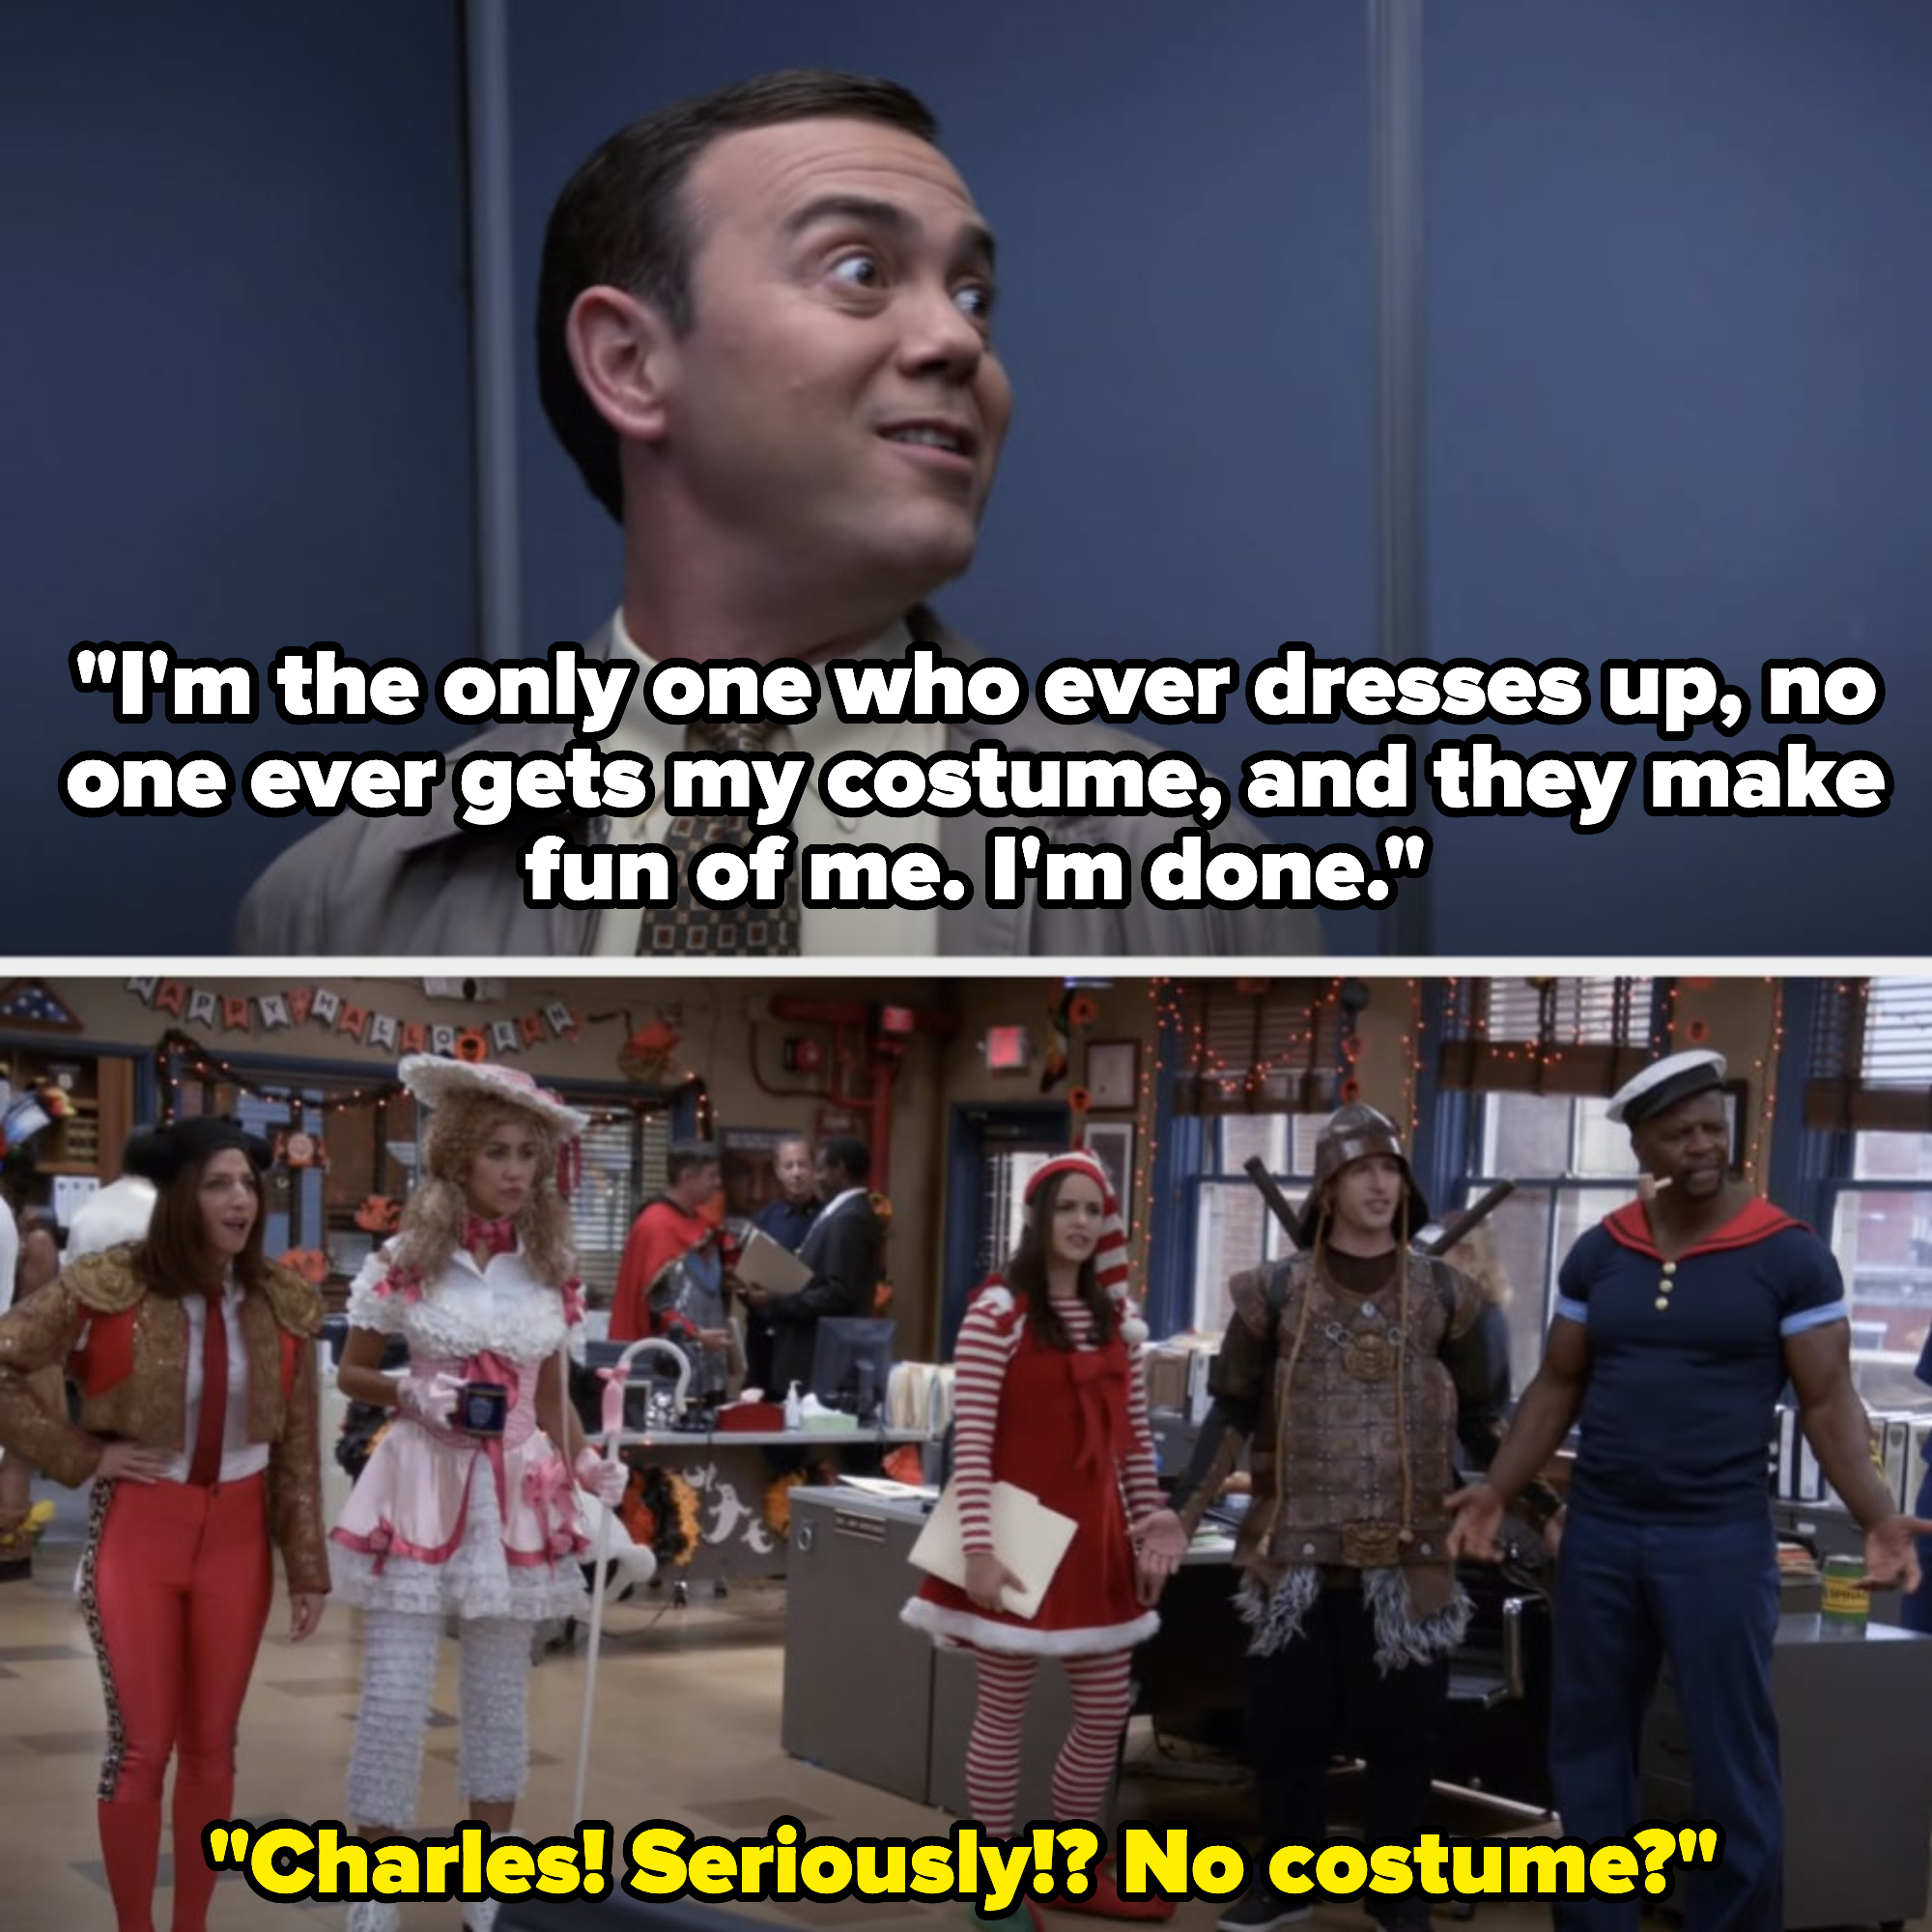 Everyone but Boyle dressed up for Halloween